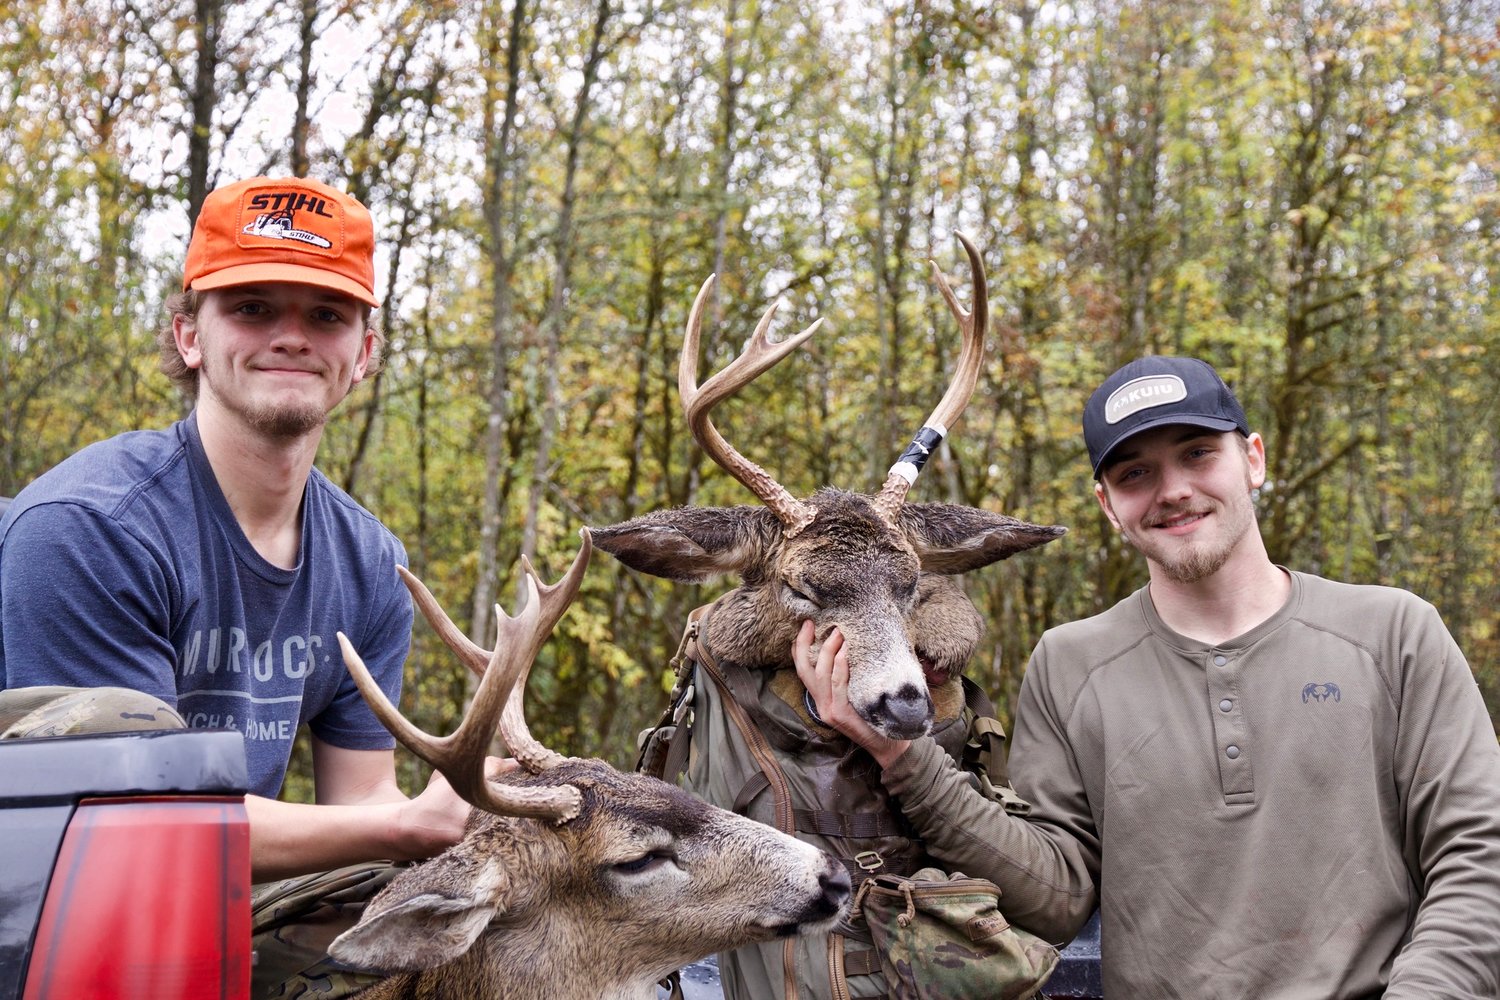 "Blacktail taken by my boys yesterday!" Chronicle staffer Sarah Burdick wrote when submitting these photos late last month. Left to right in the first image are Sawyer and Spencer Burdick. These deer were harvested during the black-tailed deer general season. Late season starts up again Nov. 17-20. These deer were harvested in "the Willapa Hills area." Sarah Burdick wouldn't provide an exact location so as to avoid giving up her sons' hunting grounds.  The Chronicle is including photos and details of successful local hunting and fishing outings in every Thursday edition. To be included, just send photos and information to news@chronline.com.